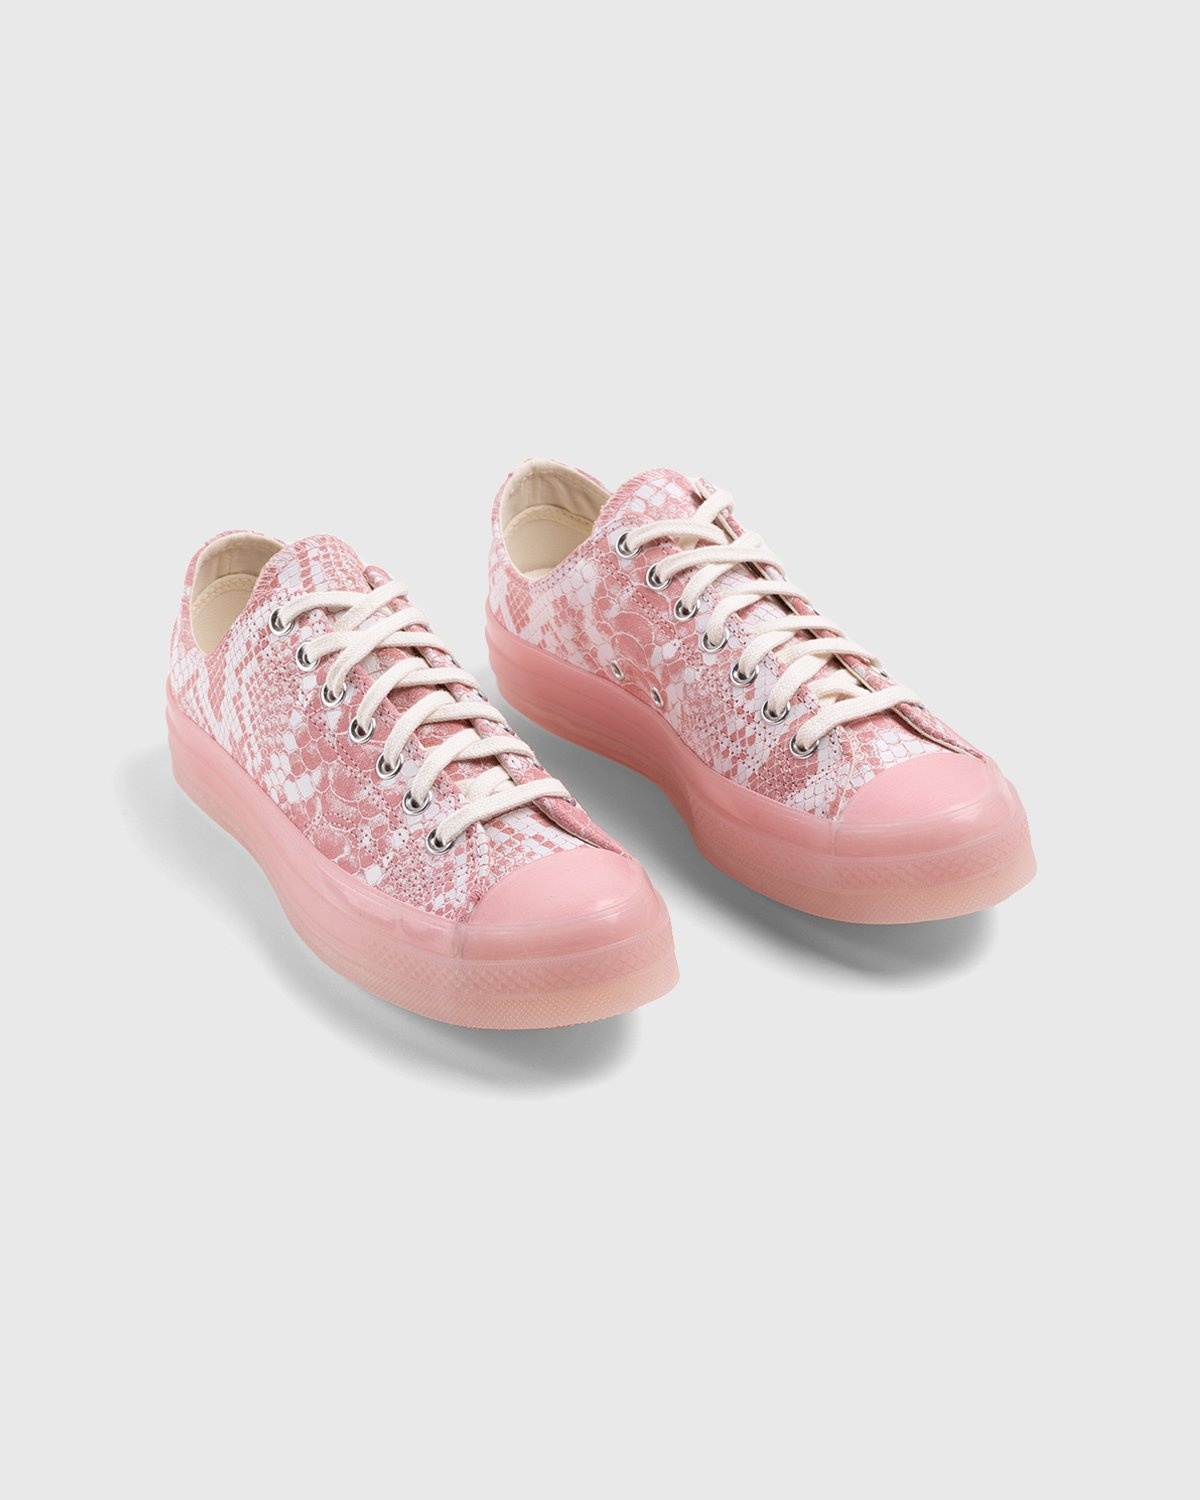 Converse x GOLF WANG – Chuck 70 Ox Python Pink Dogwood Vintage White - Low Top Sneakers - Pink - Image 3